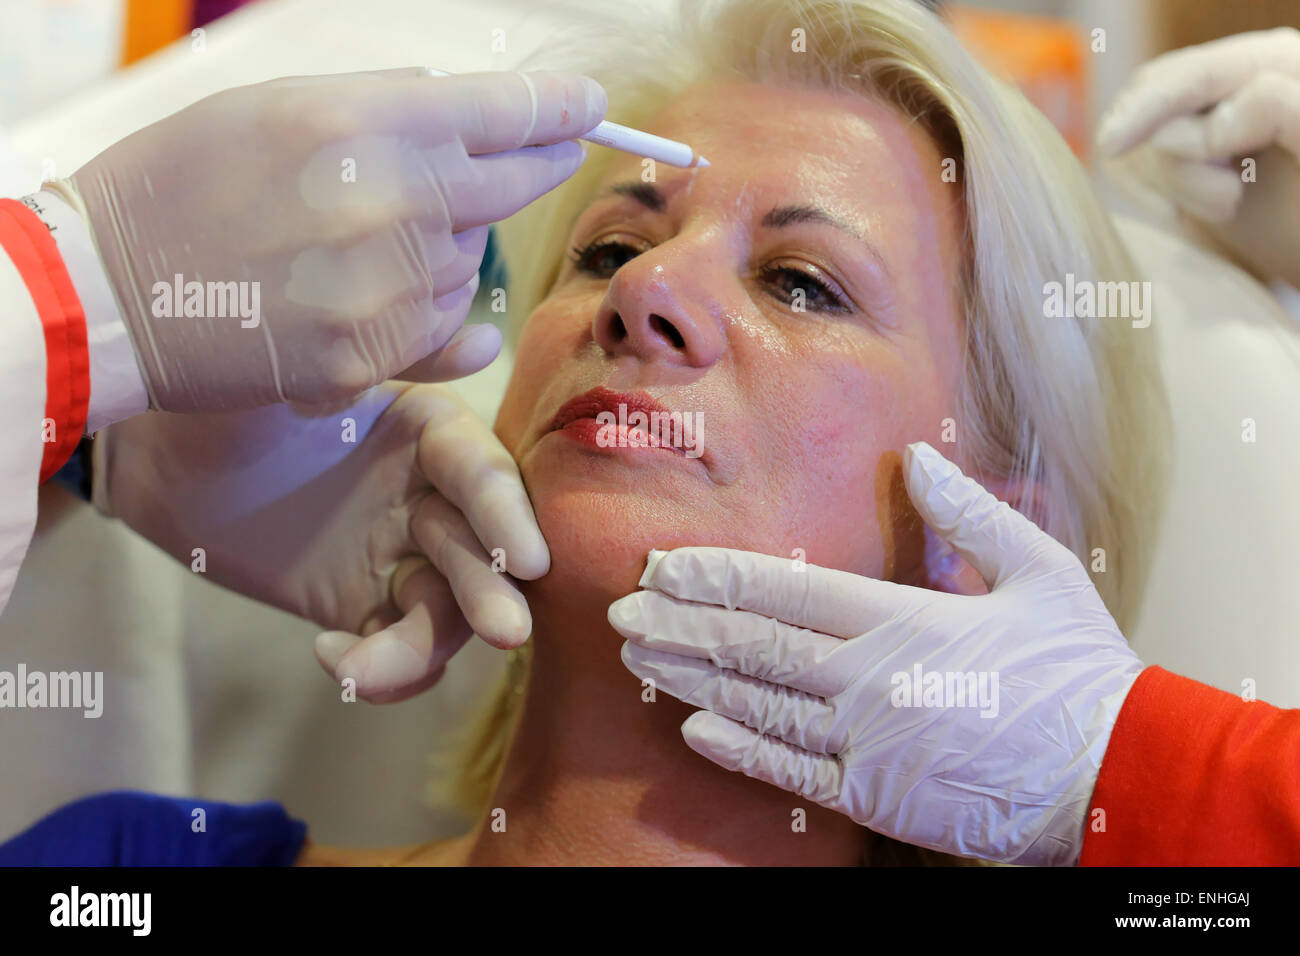 A facial plastic surgery specialist marks the facial skin of a client to inject hyaluronic acid. Dortmund, Germany Stock Photo